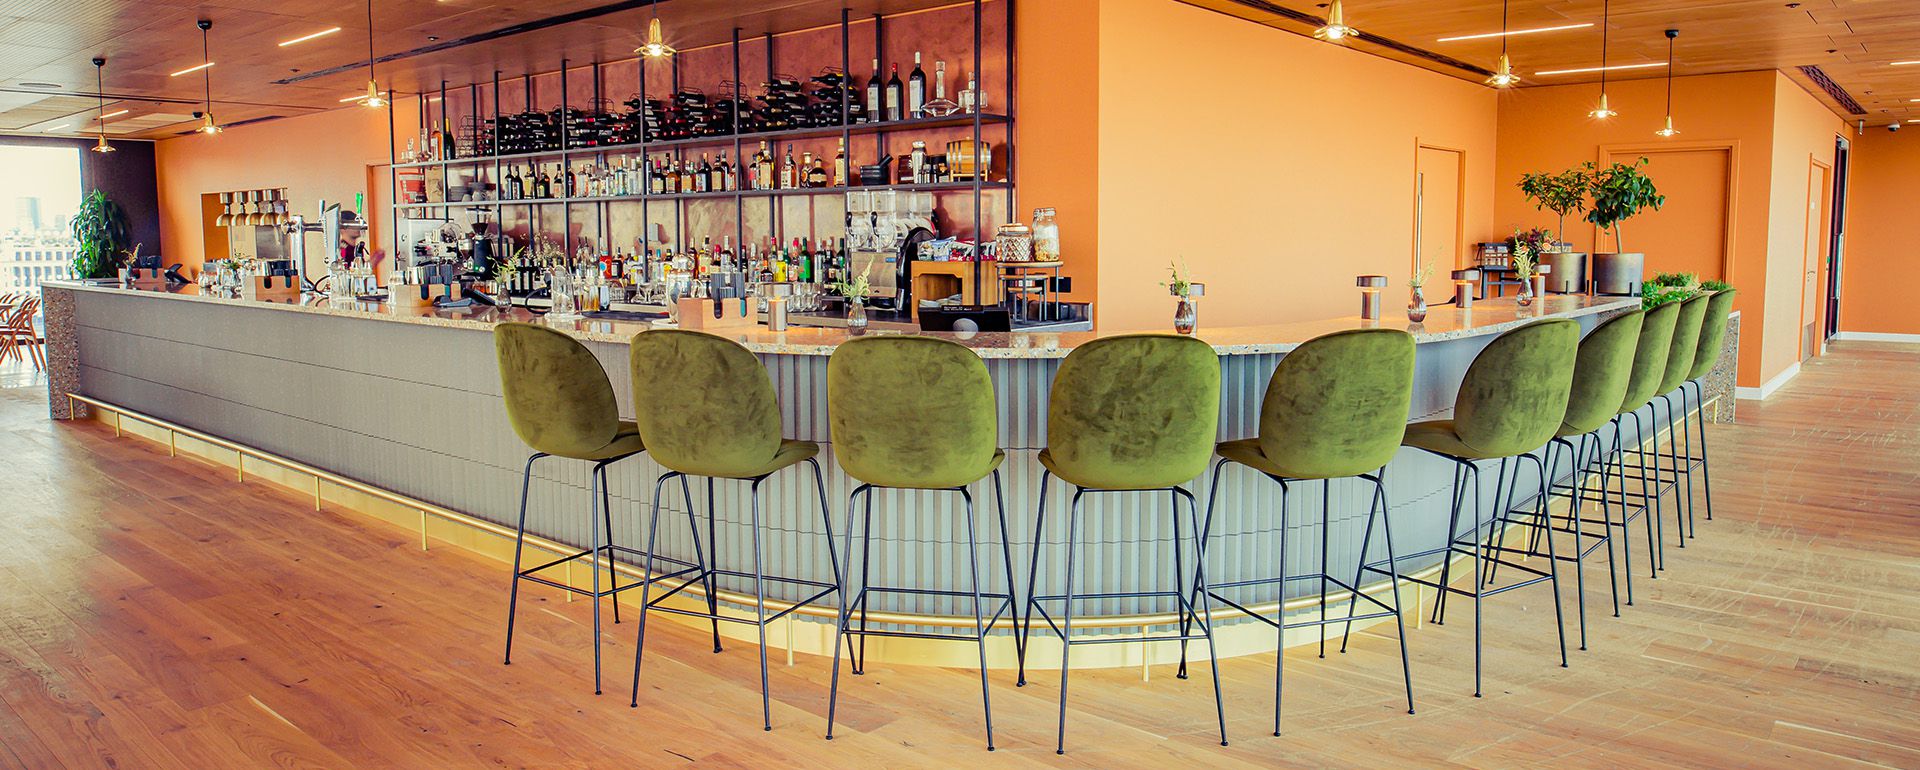 Curved bar with chairs